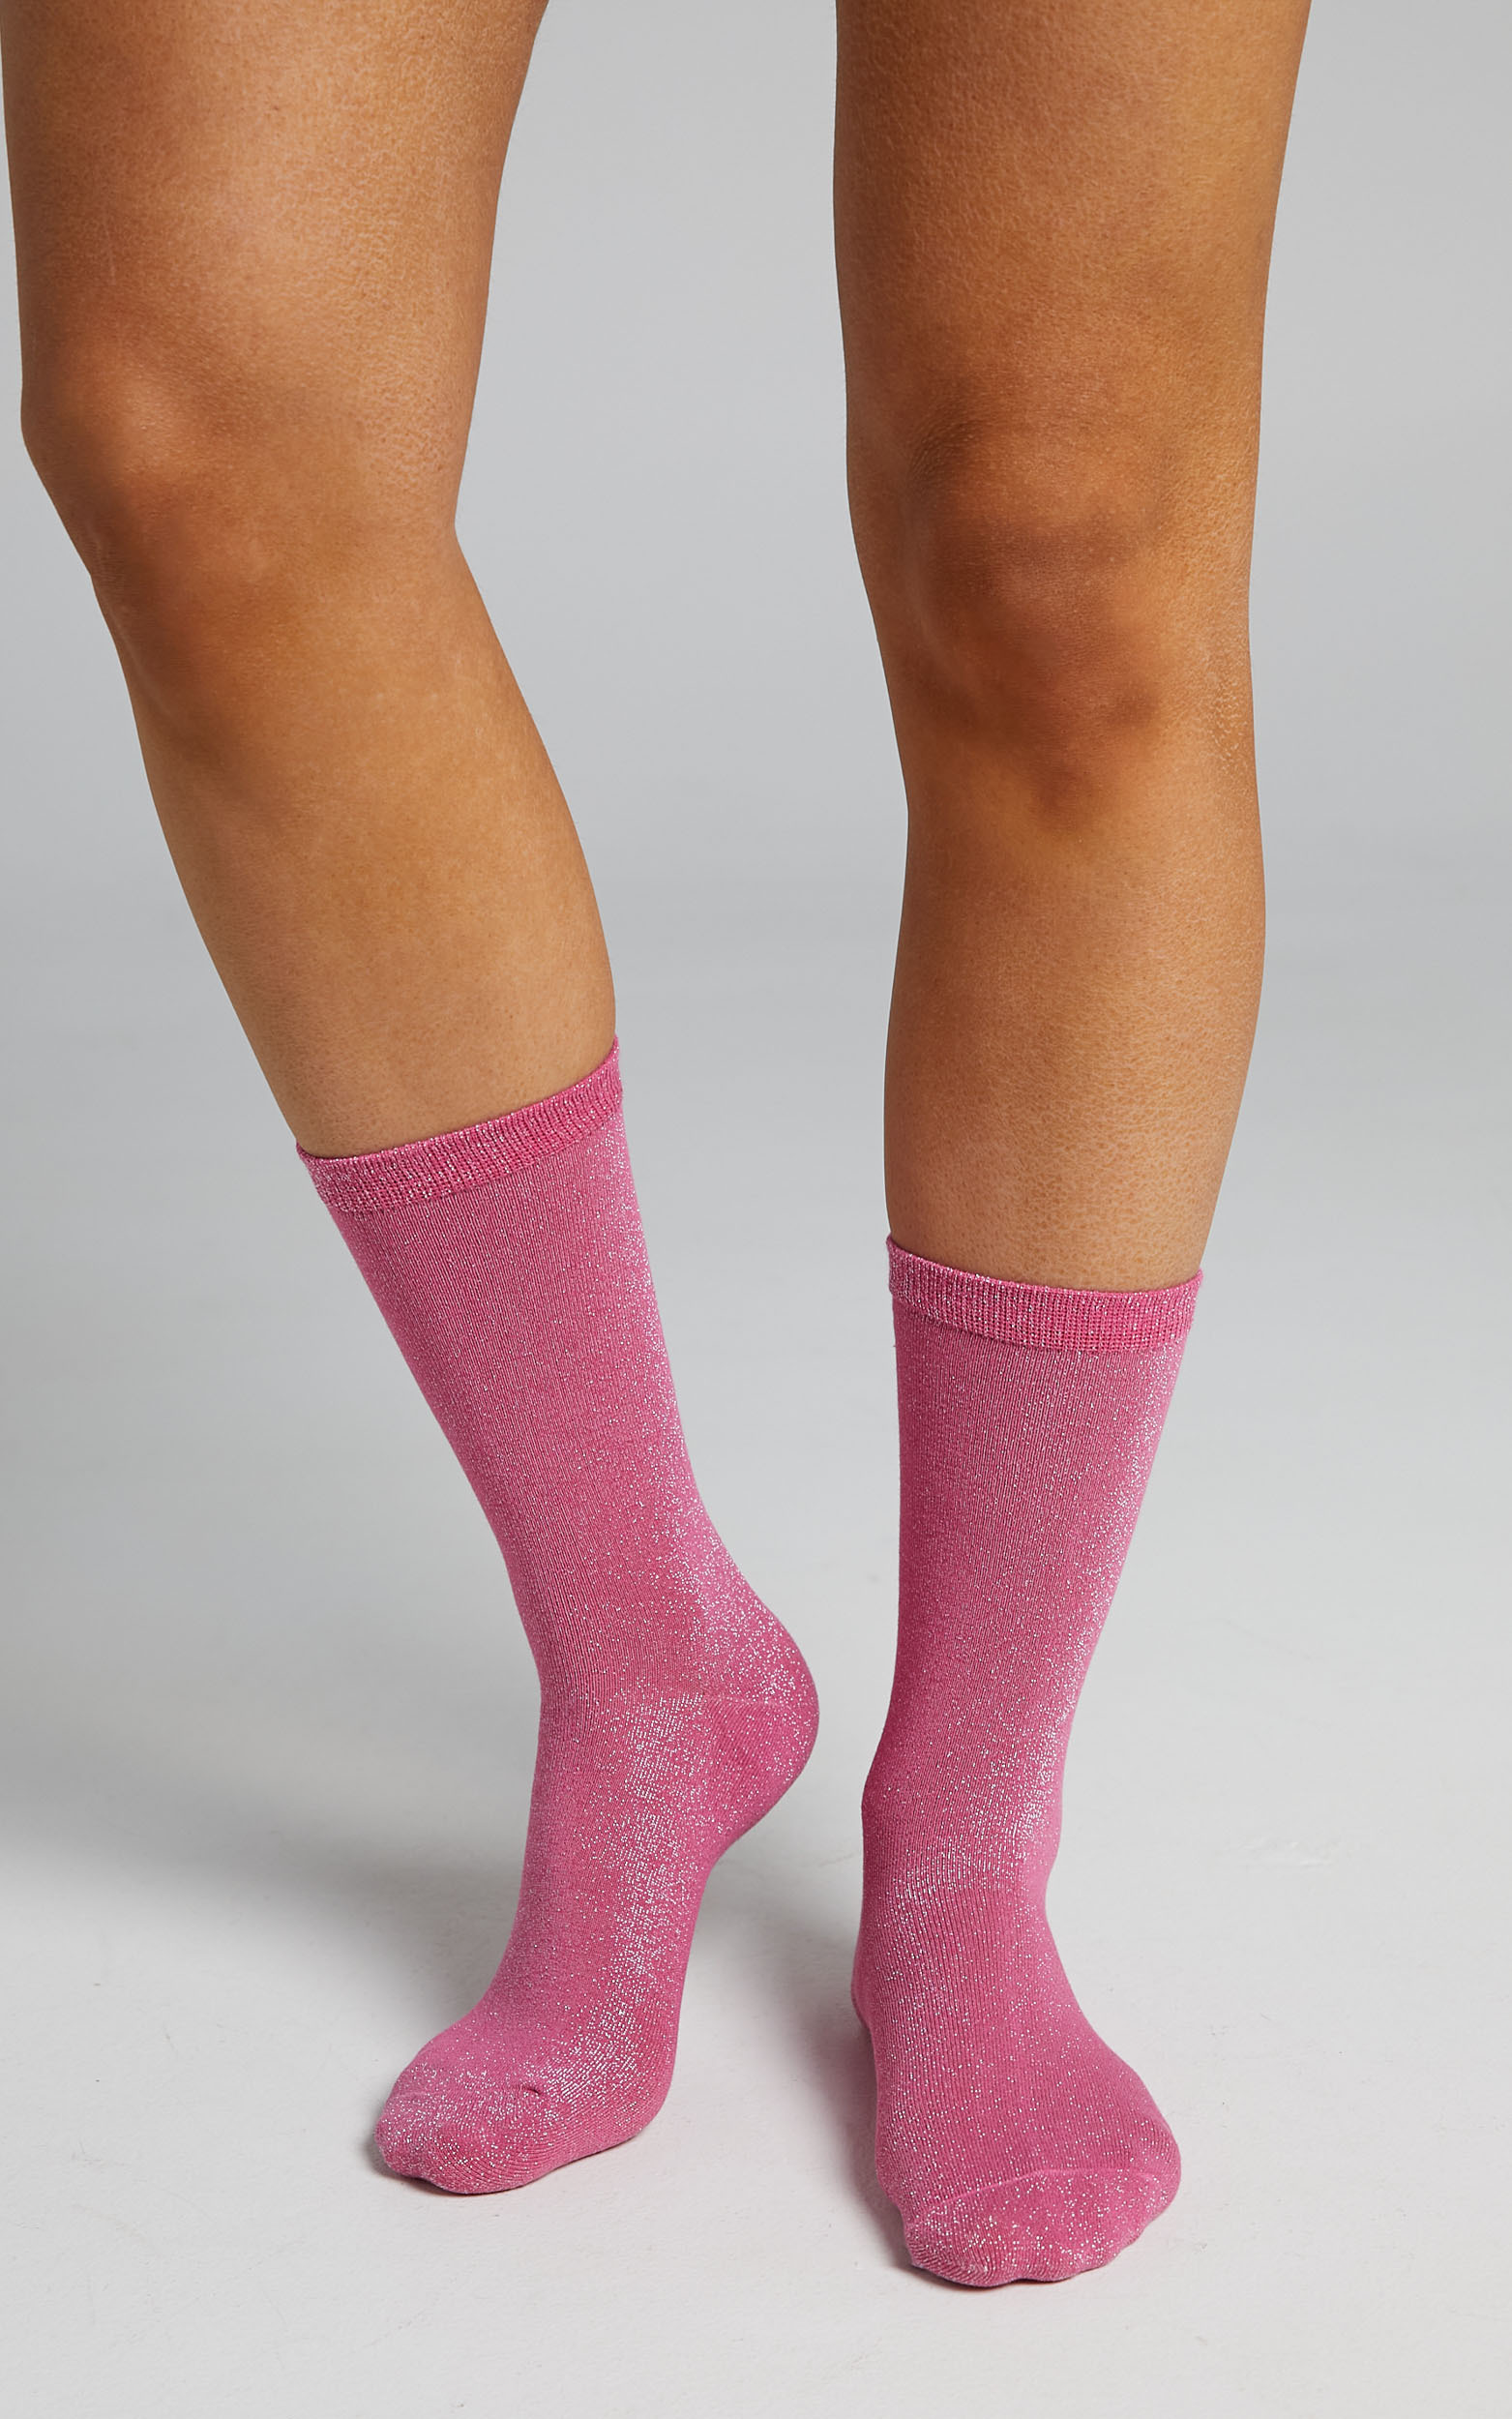 Apryl Socks in Pink glitter - OneSize, PNK2, hi-res image number null